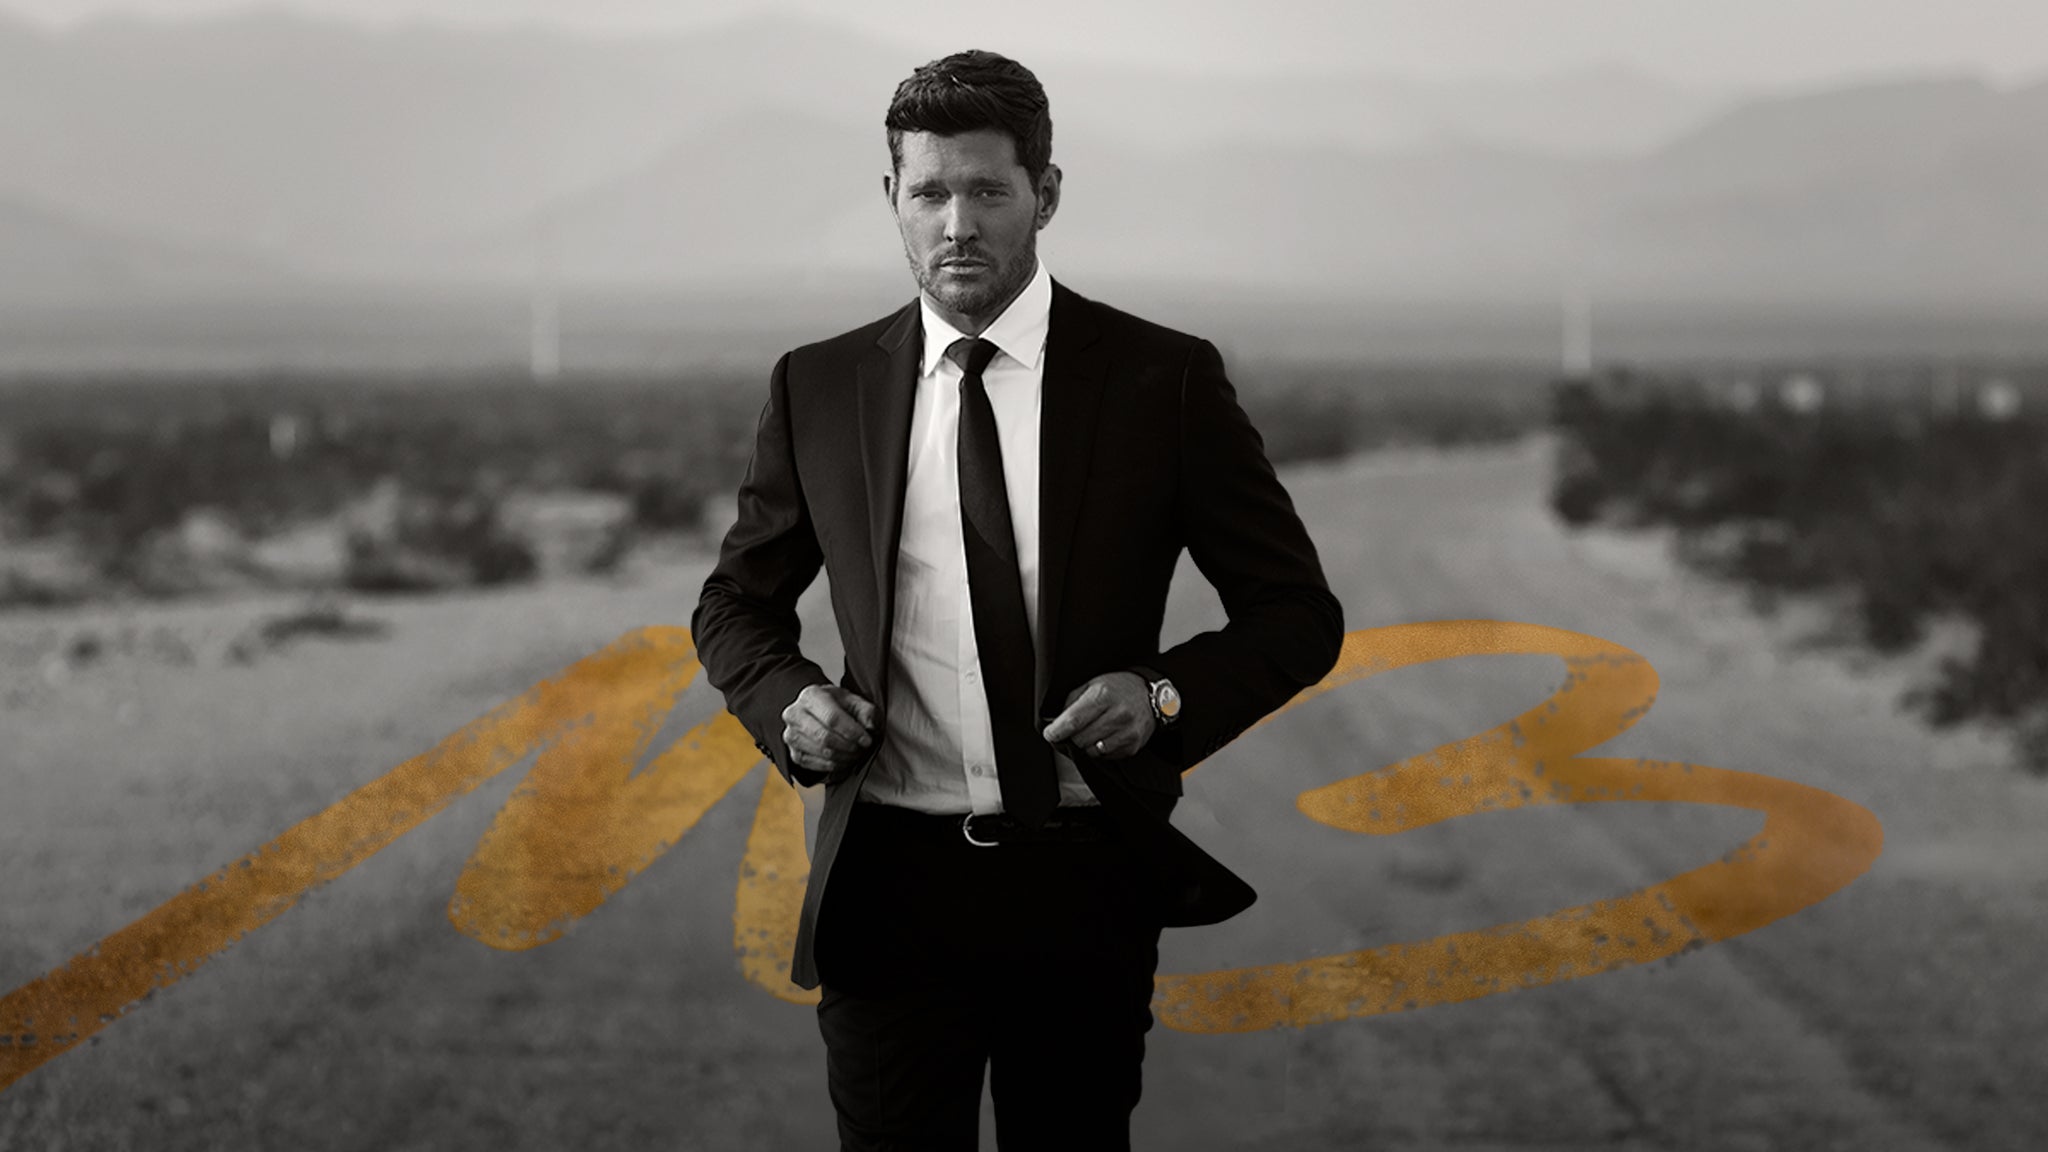 Image used with permission from Ticketmaster | Michael Bublé tickets